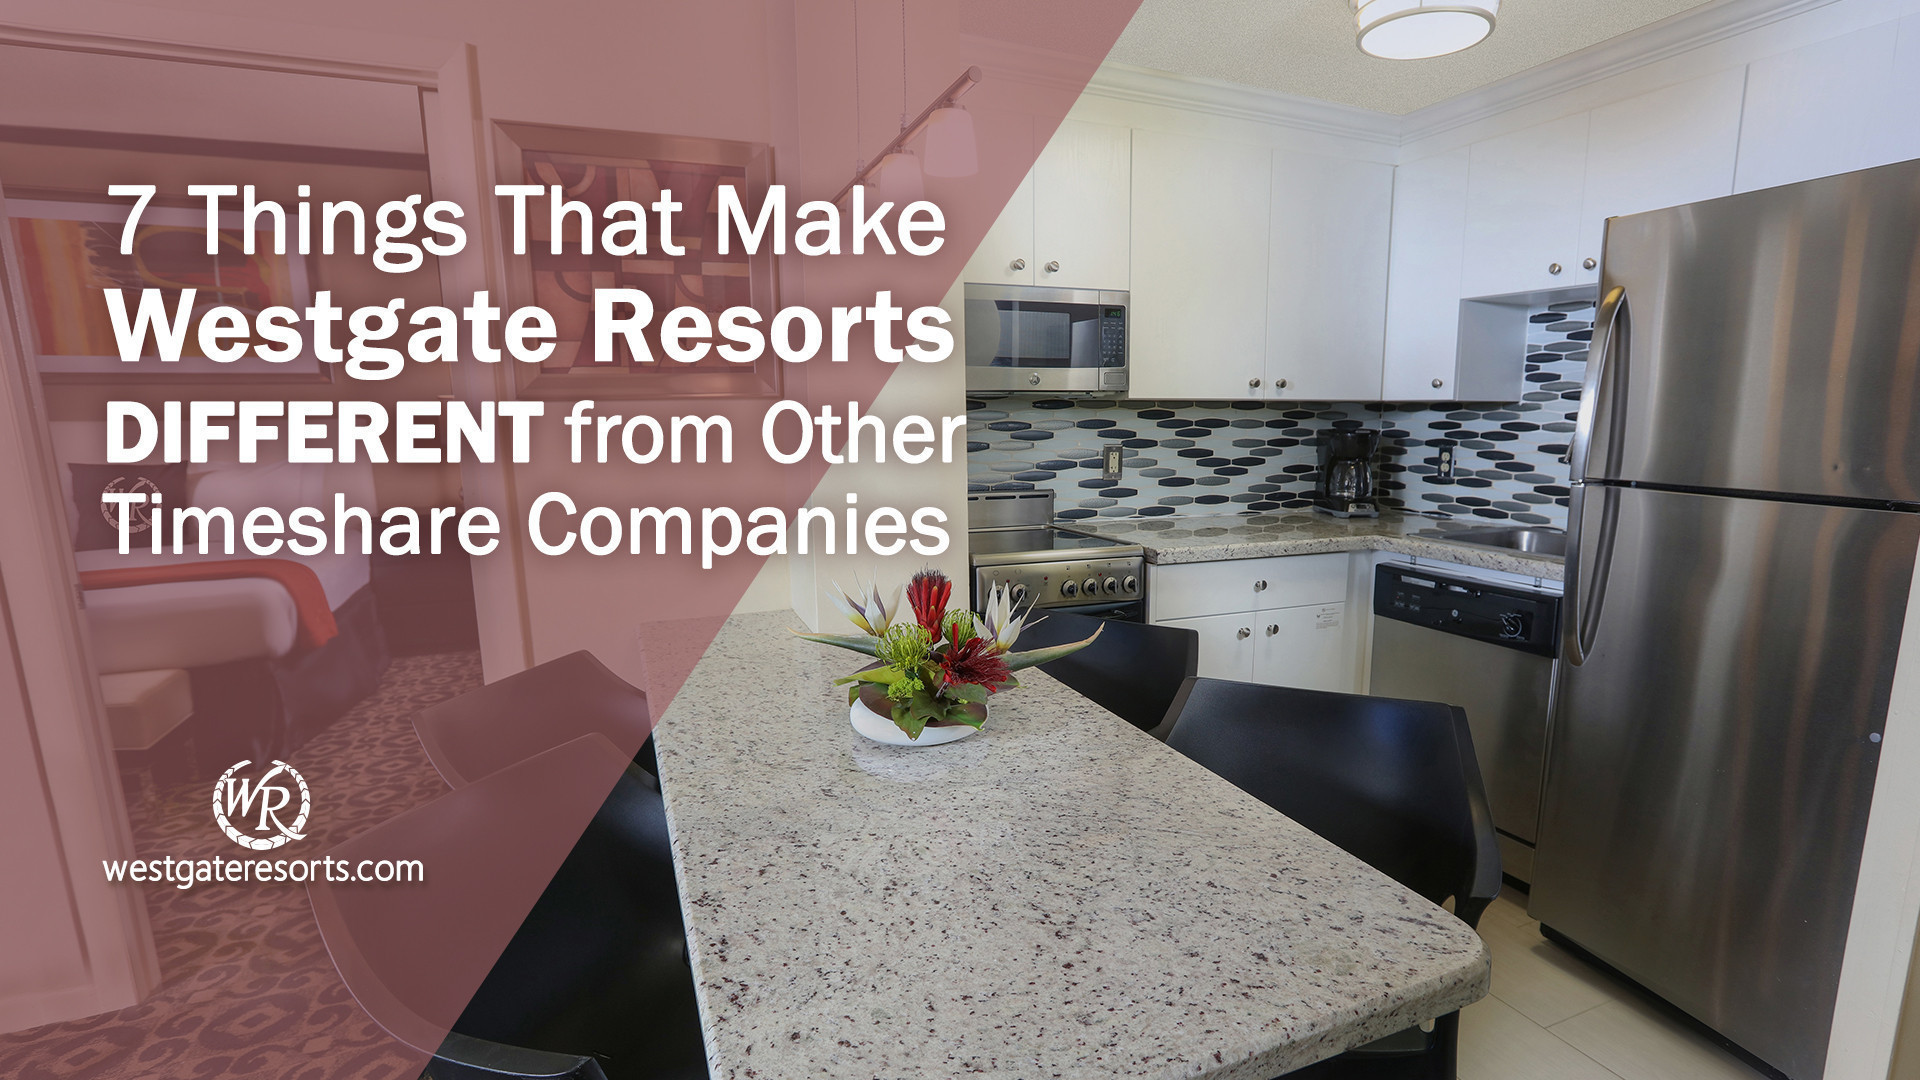 Westgate Resorts Versus Other Timeshare Companies | Westgate Timeshare